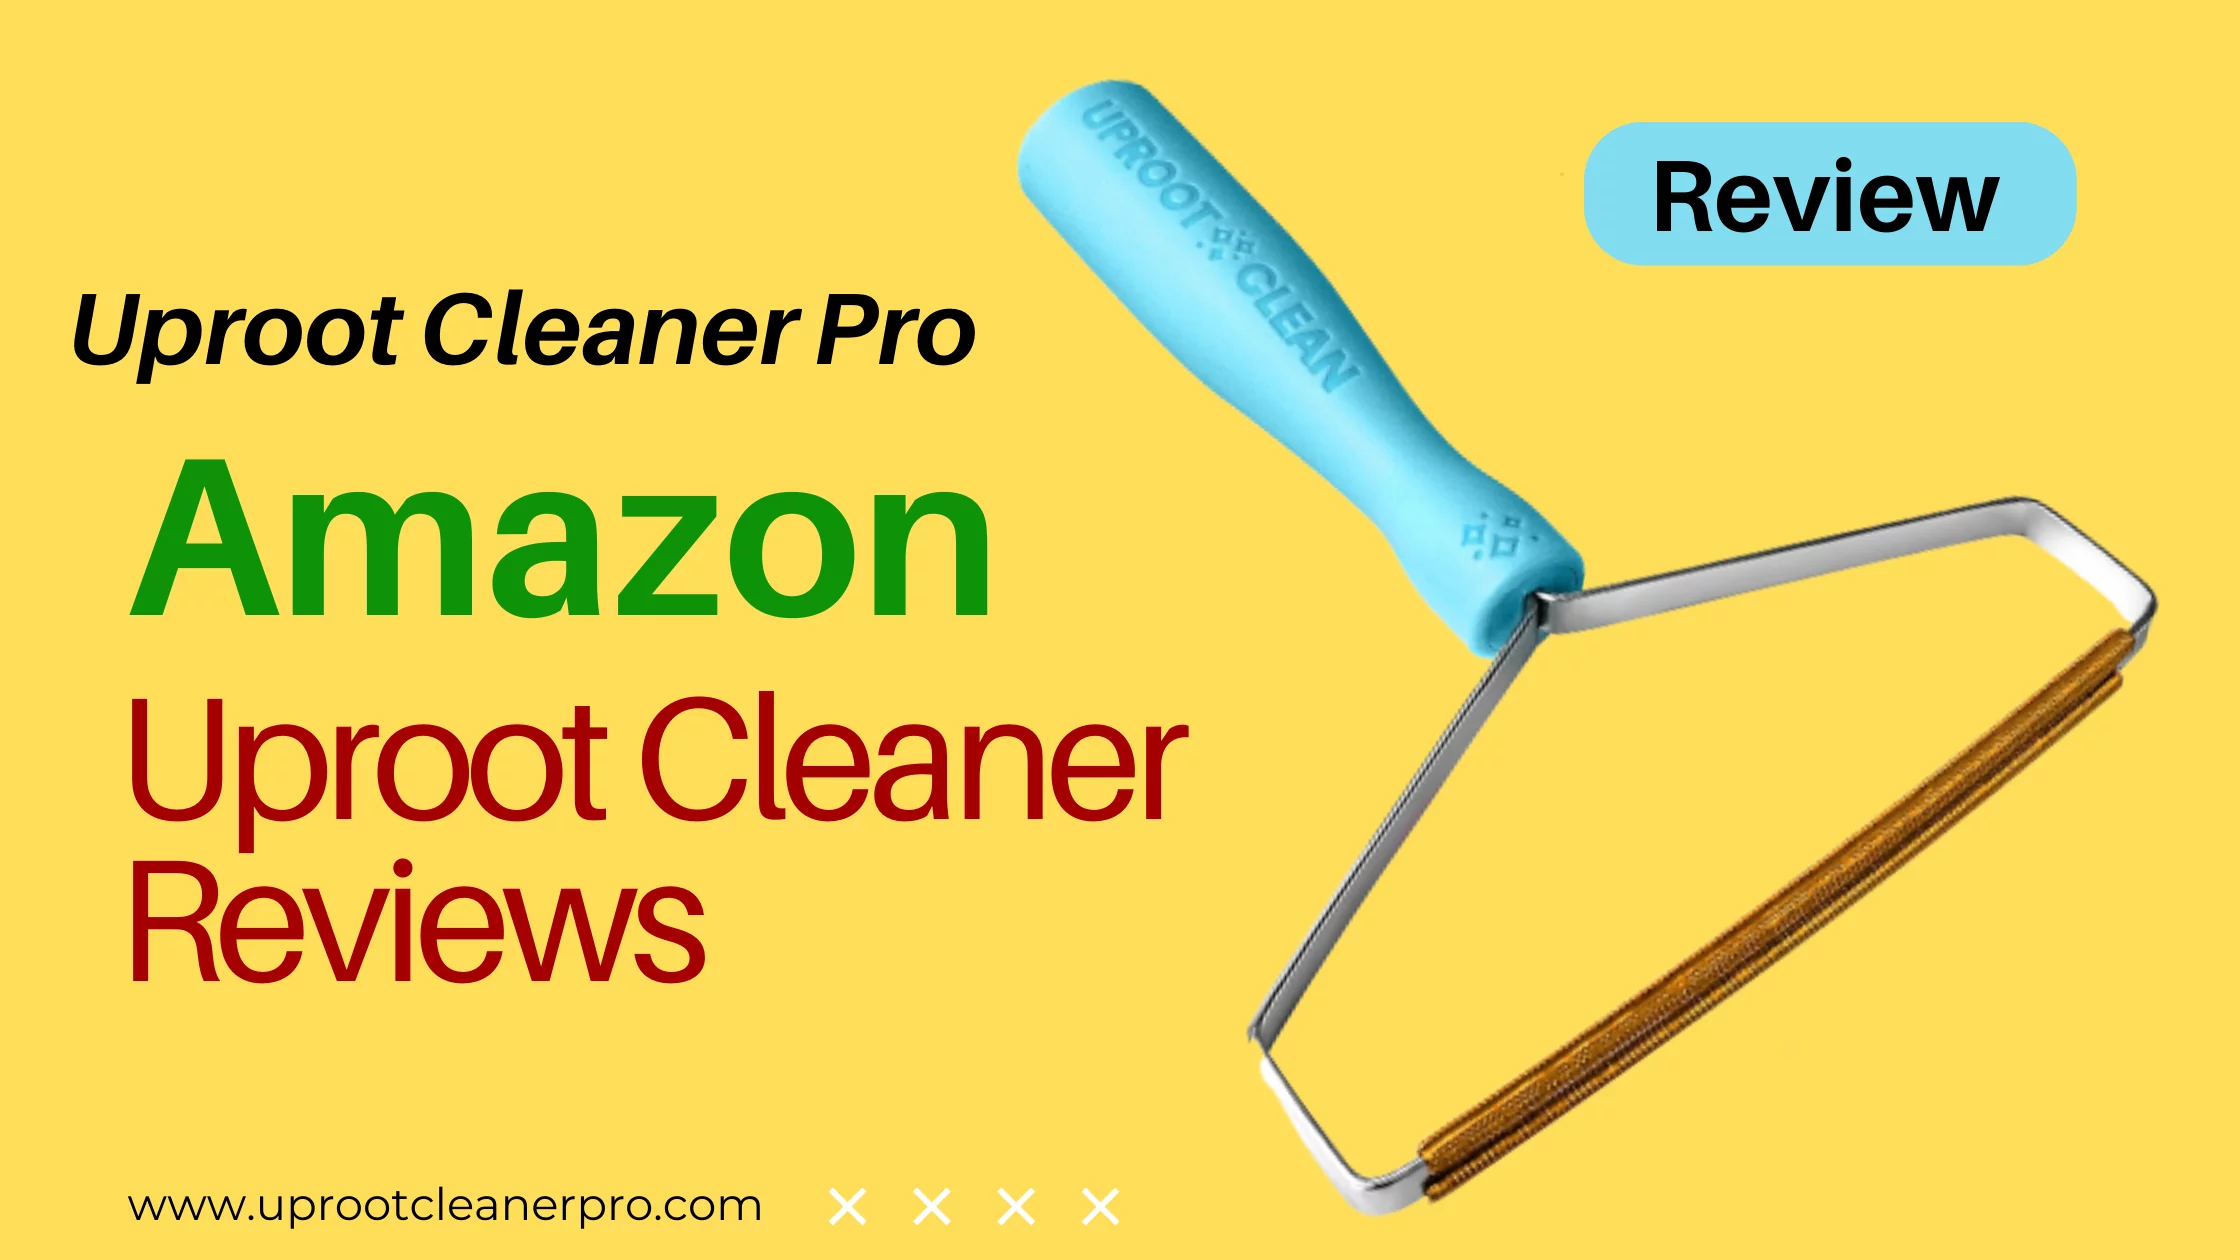 Uproot cleaner pro reviews